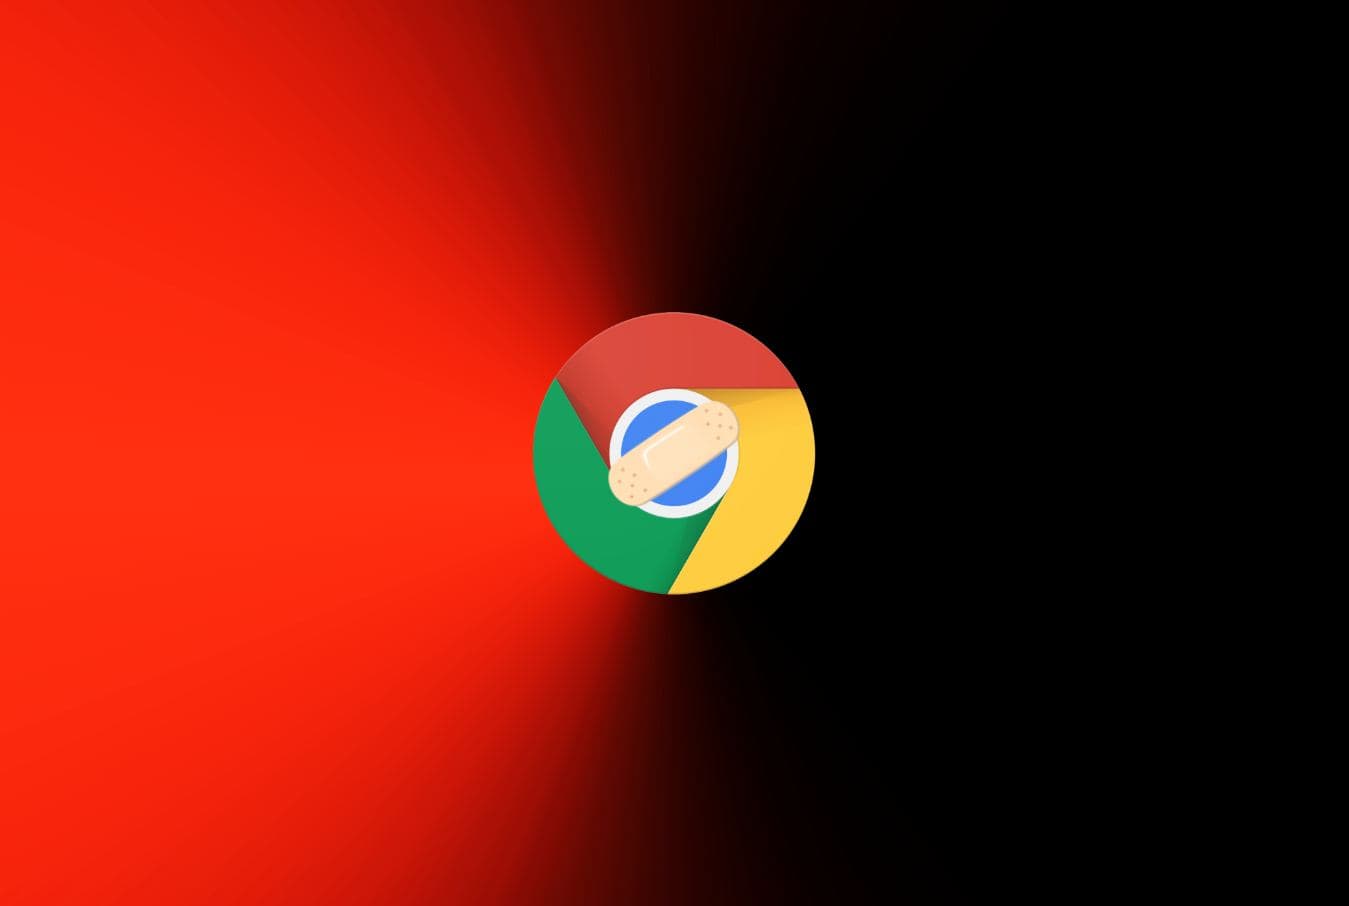 Urgent Chrome security update released to patch widely exploited 0-day